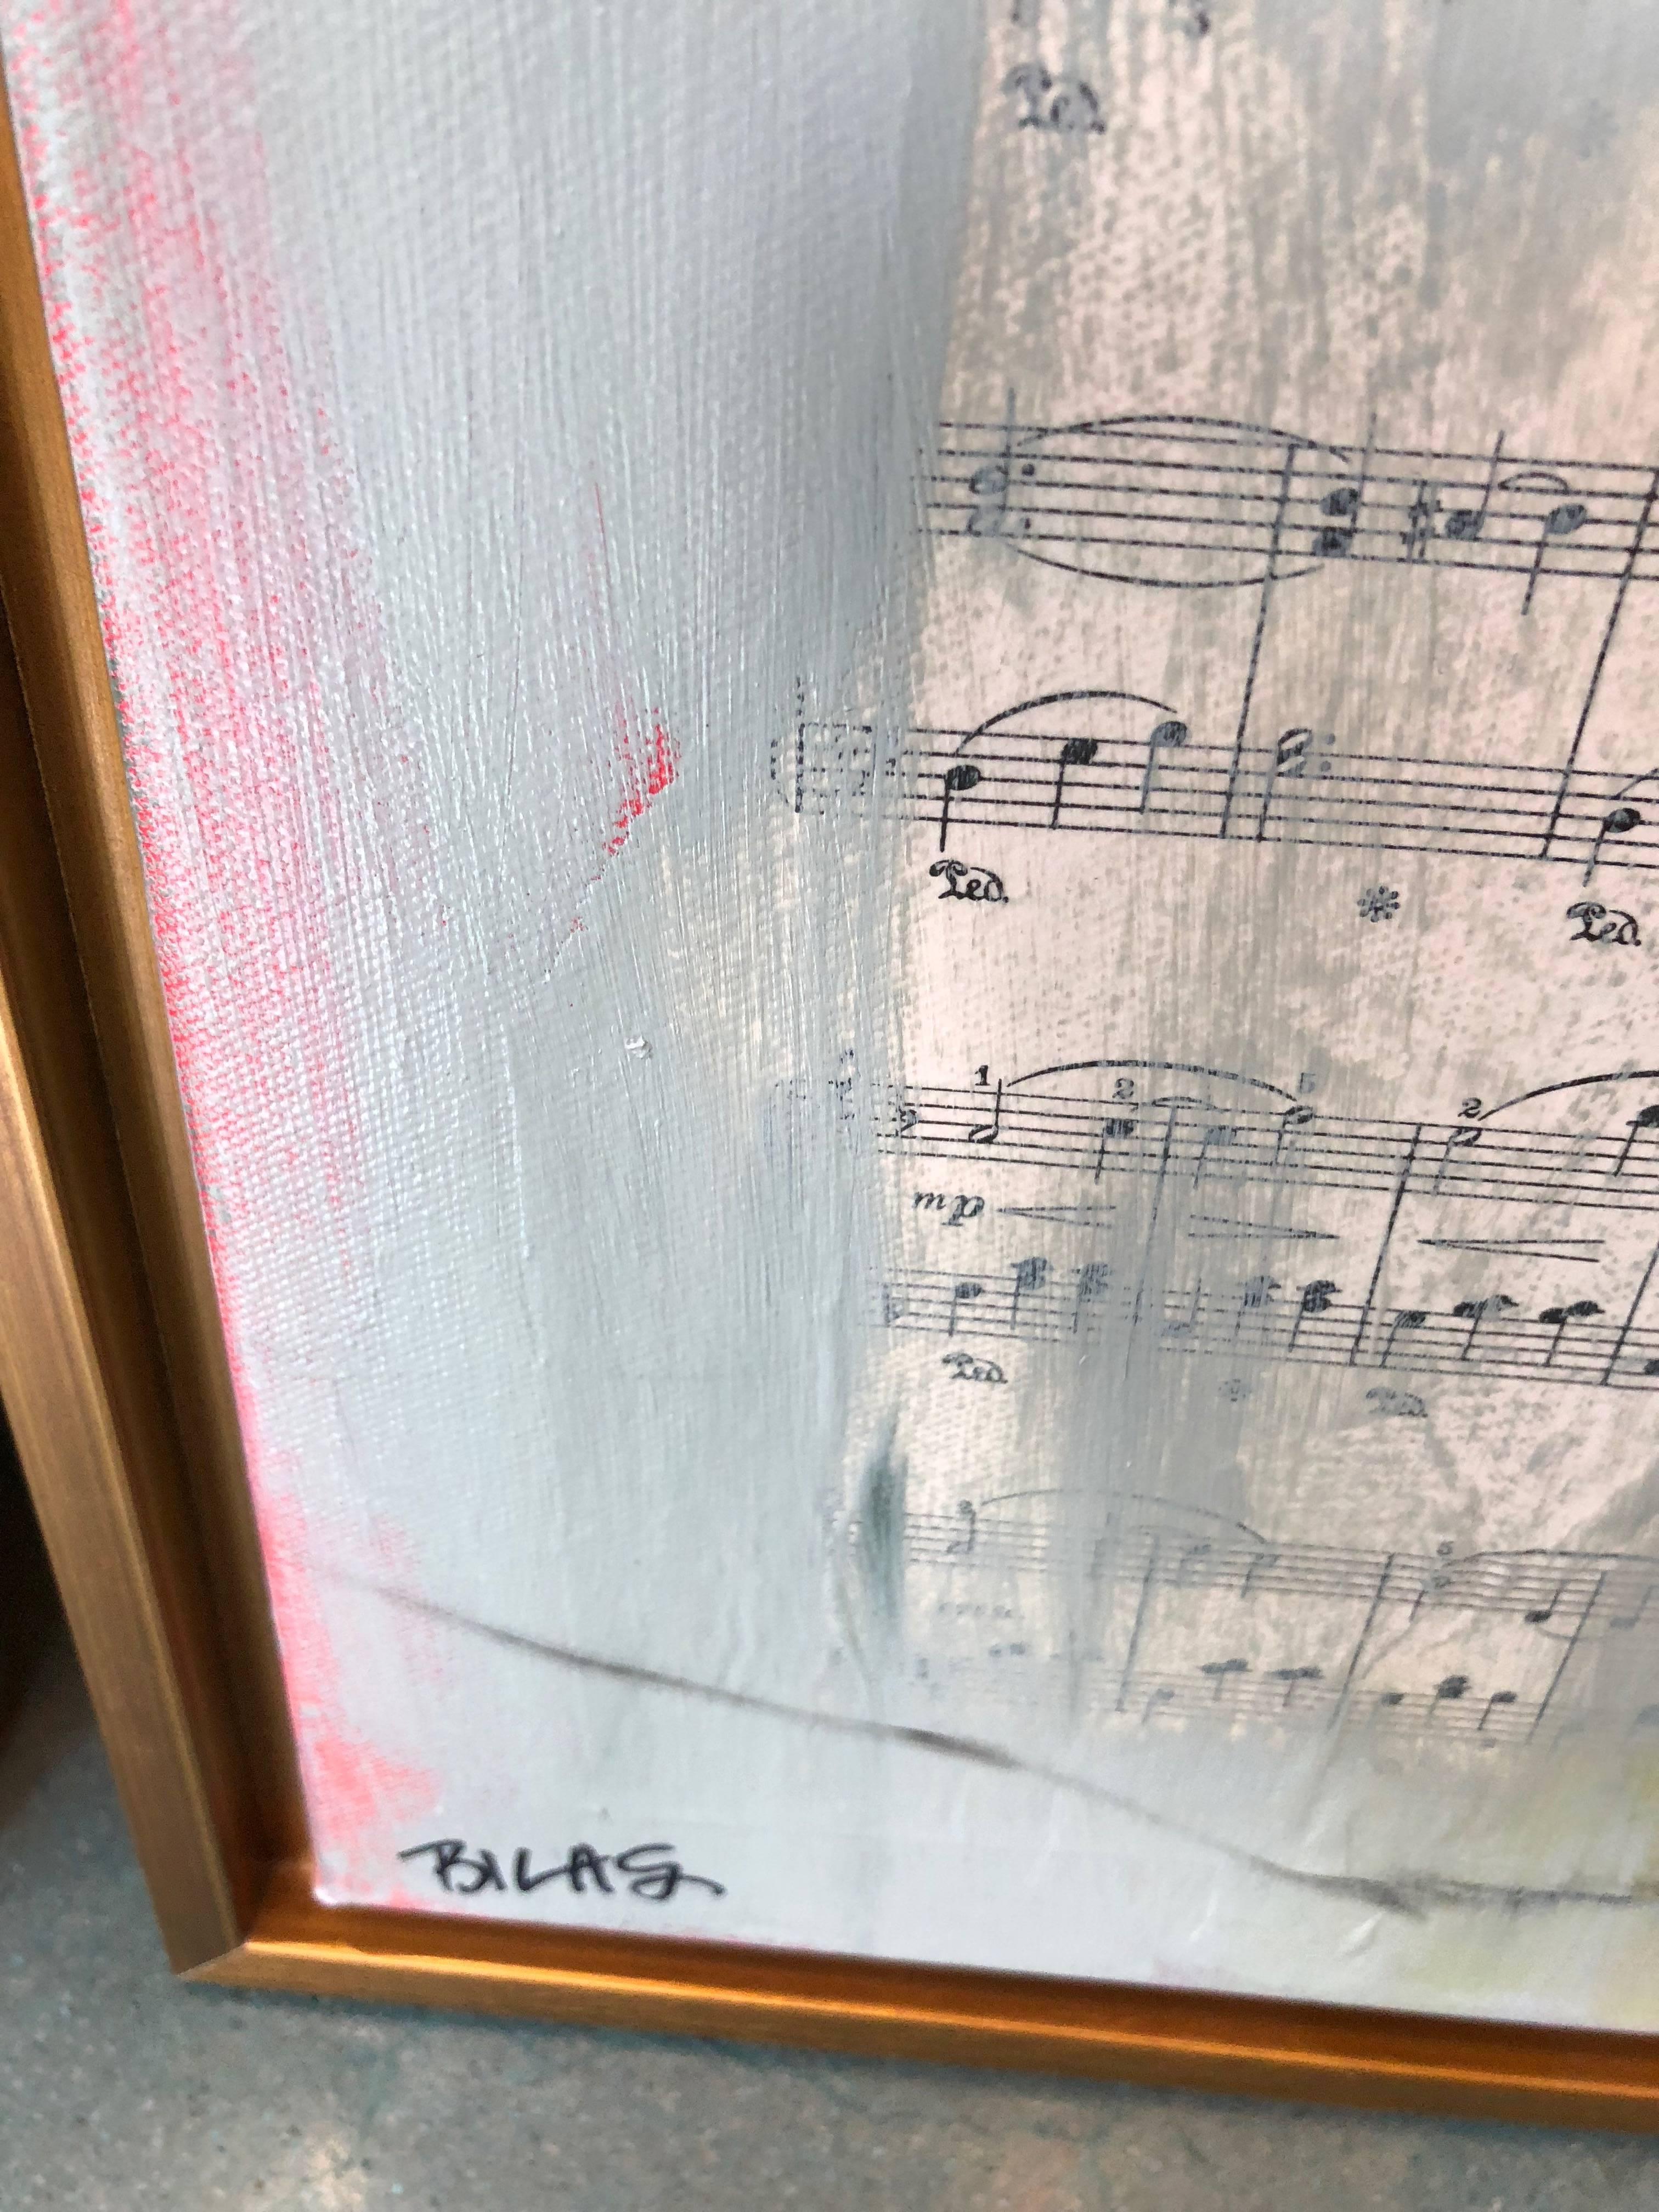 Artist Wendy Bilas, uses grays, reds, and whites to create a tranquil sanctuary for the vibrant Eastern Bluebird featured on the canvas. Sheet music from Melody can be seen peeking out from under the paint, and adds to the grace and spirit of the